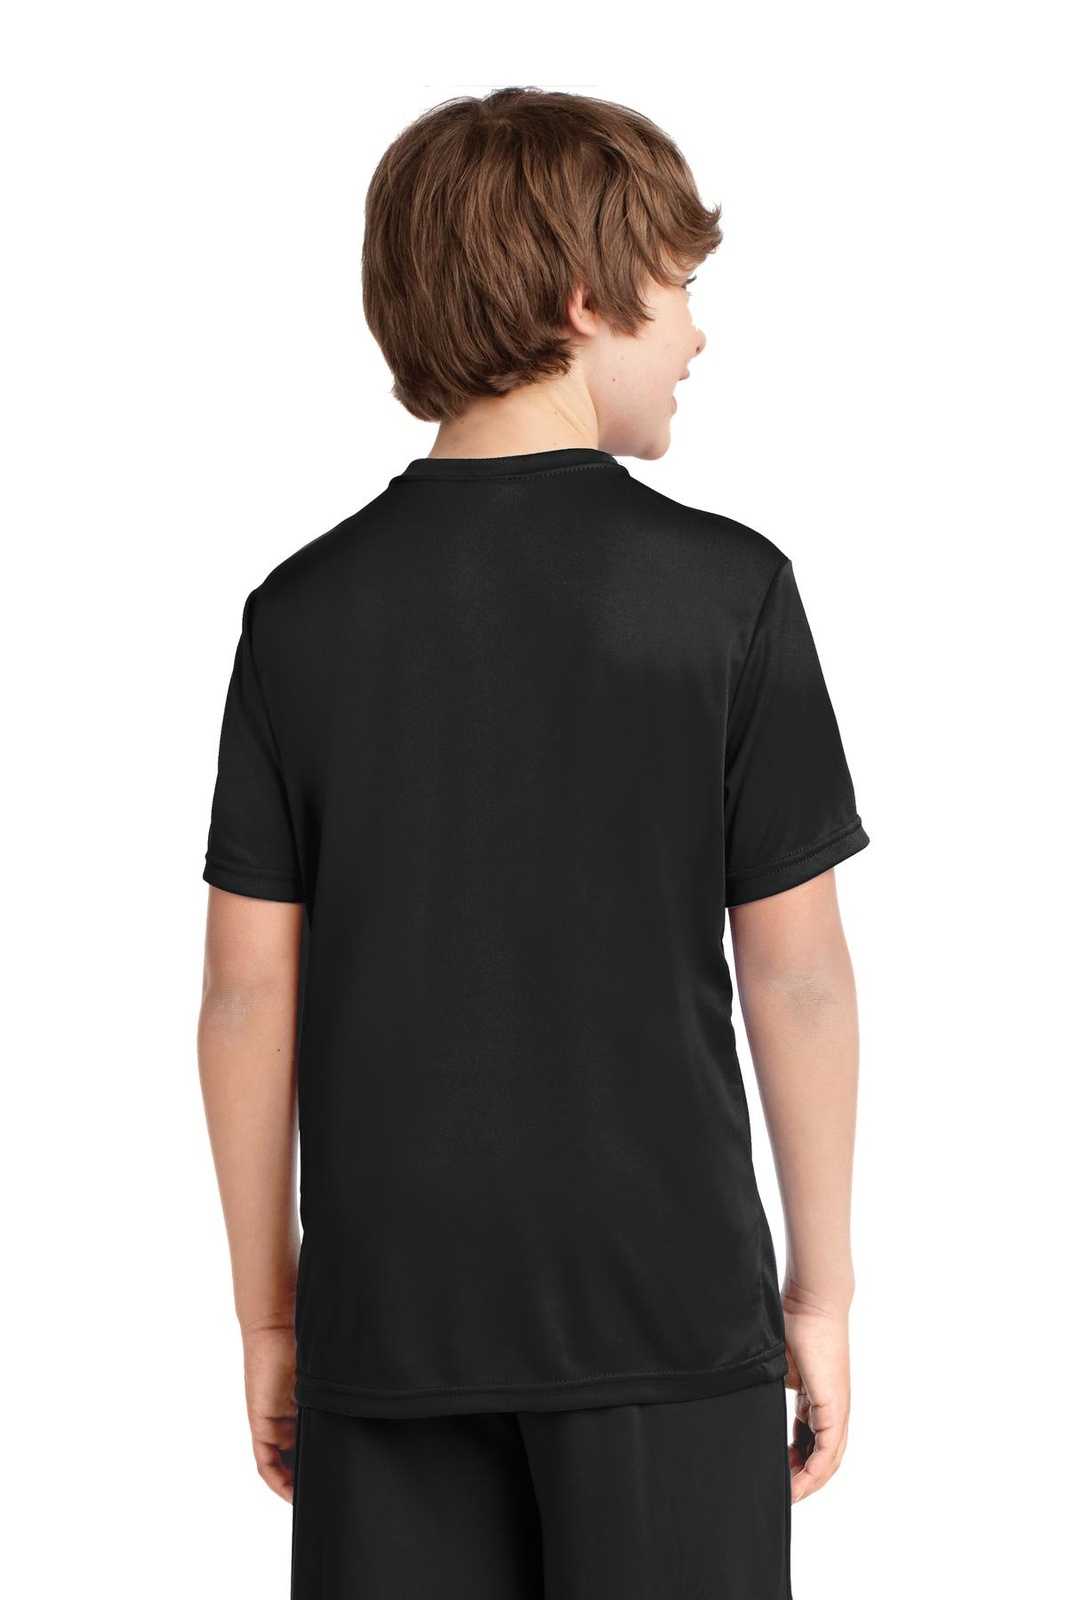 Port & Company PC380Y Youth Performance Tee - Jet Black - HIT a Double - 1